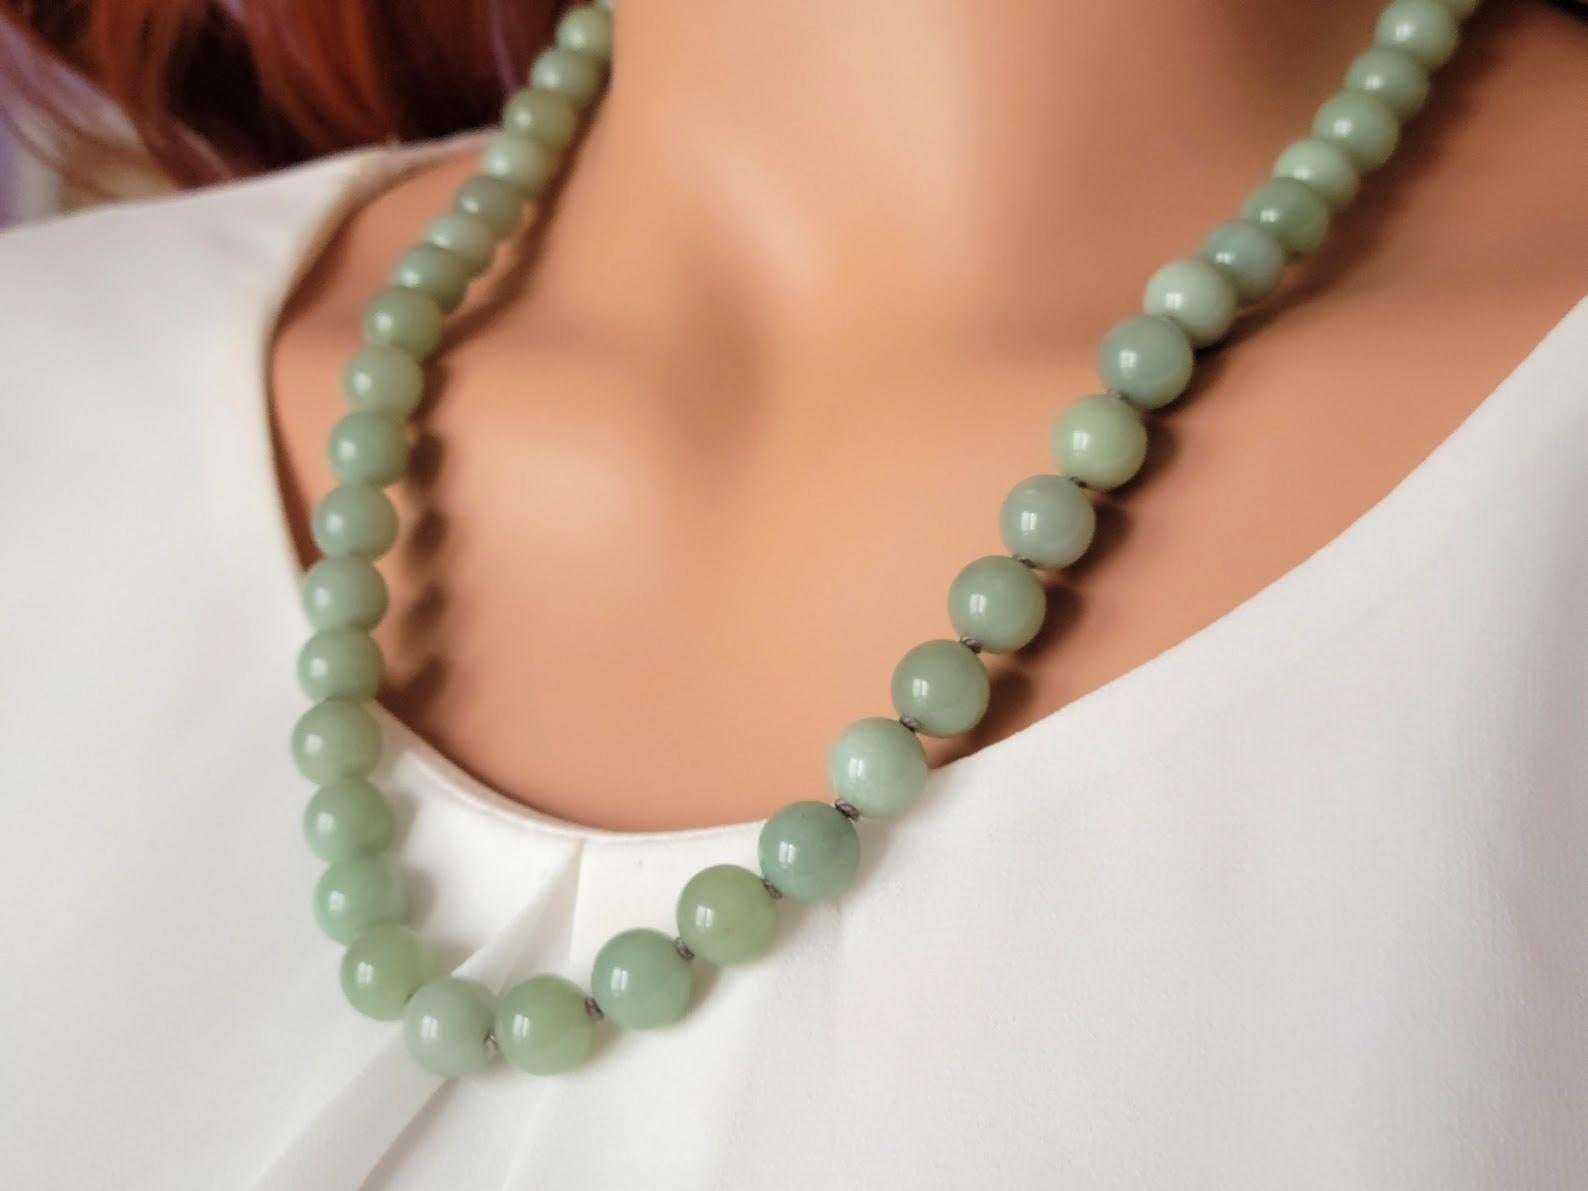 New Zealand Green Inanga Nephrite Necklace For Sale 2